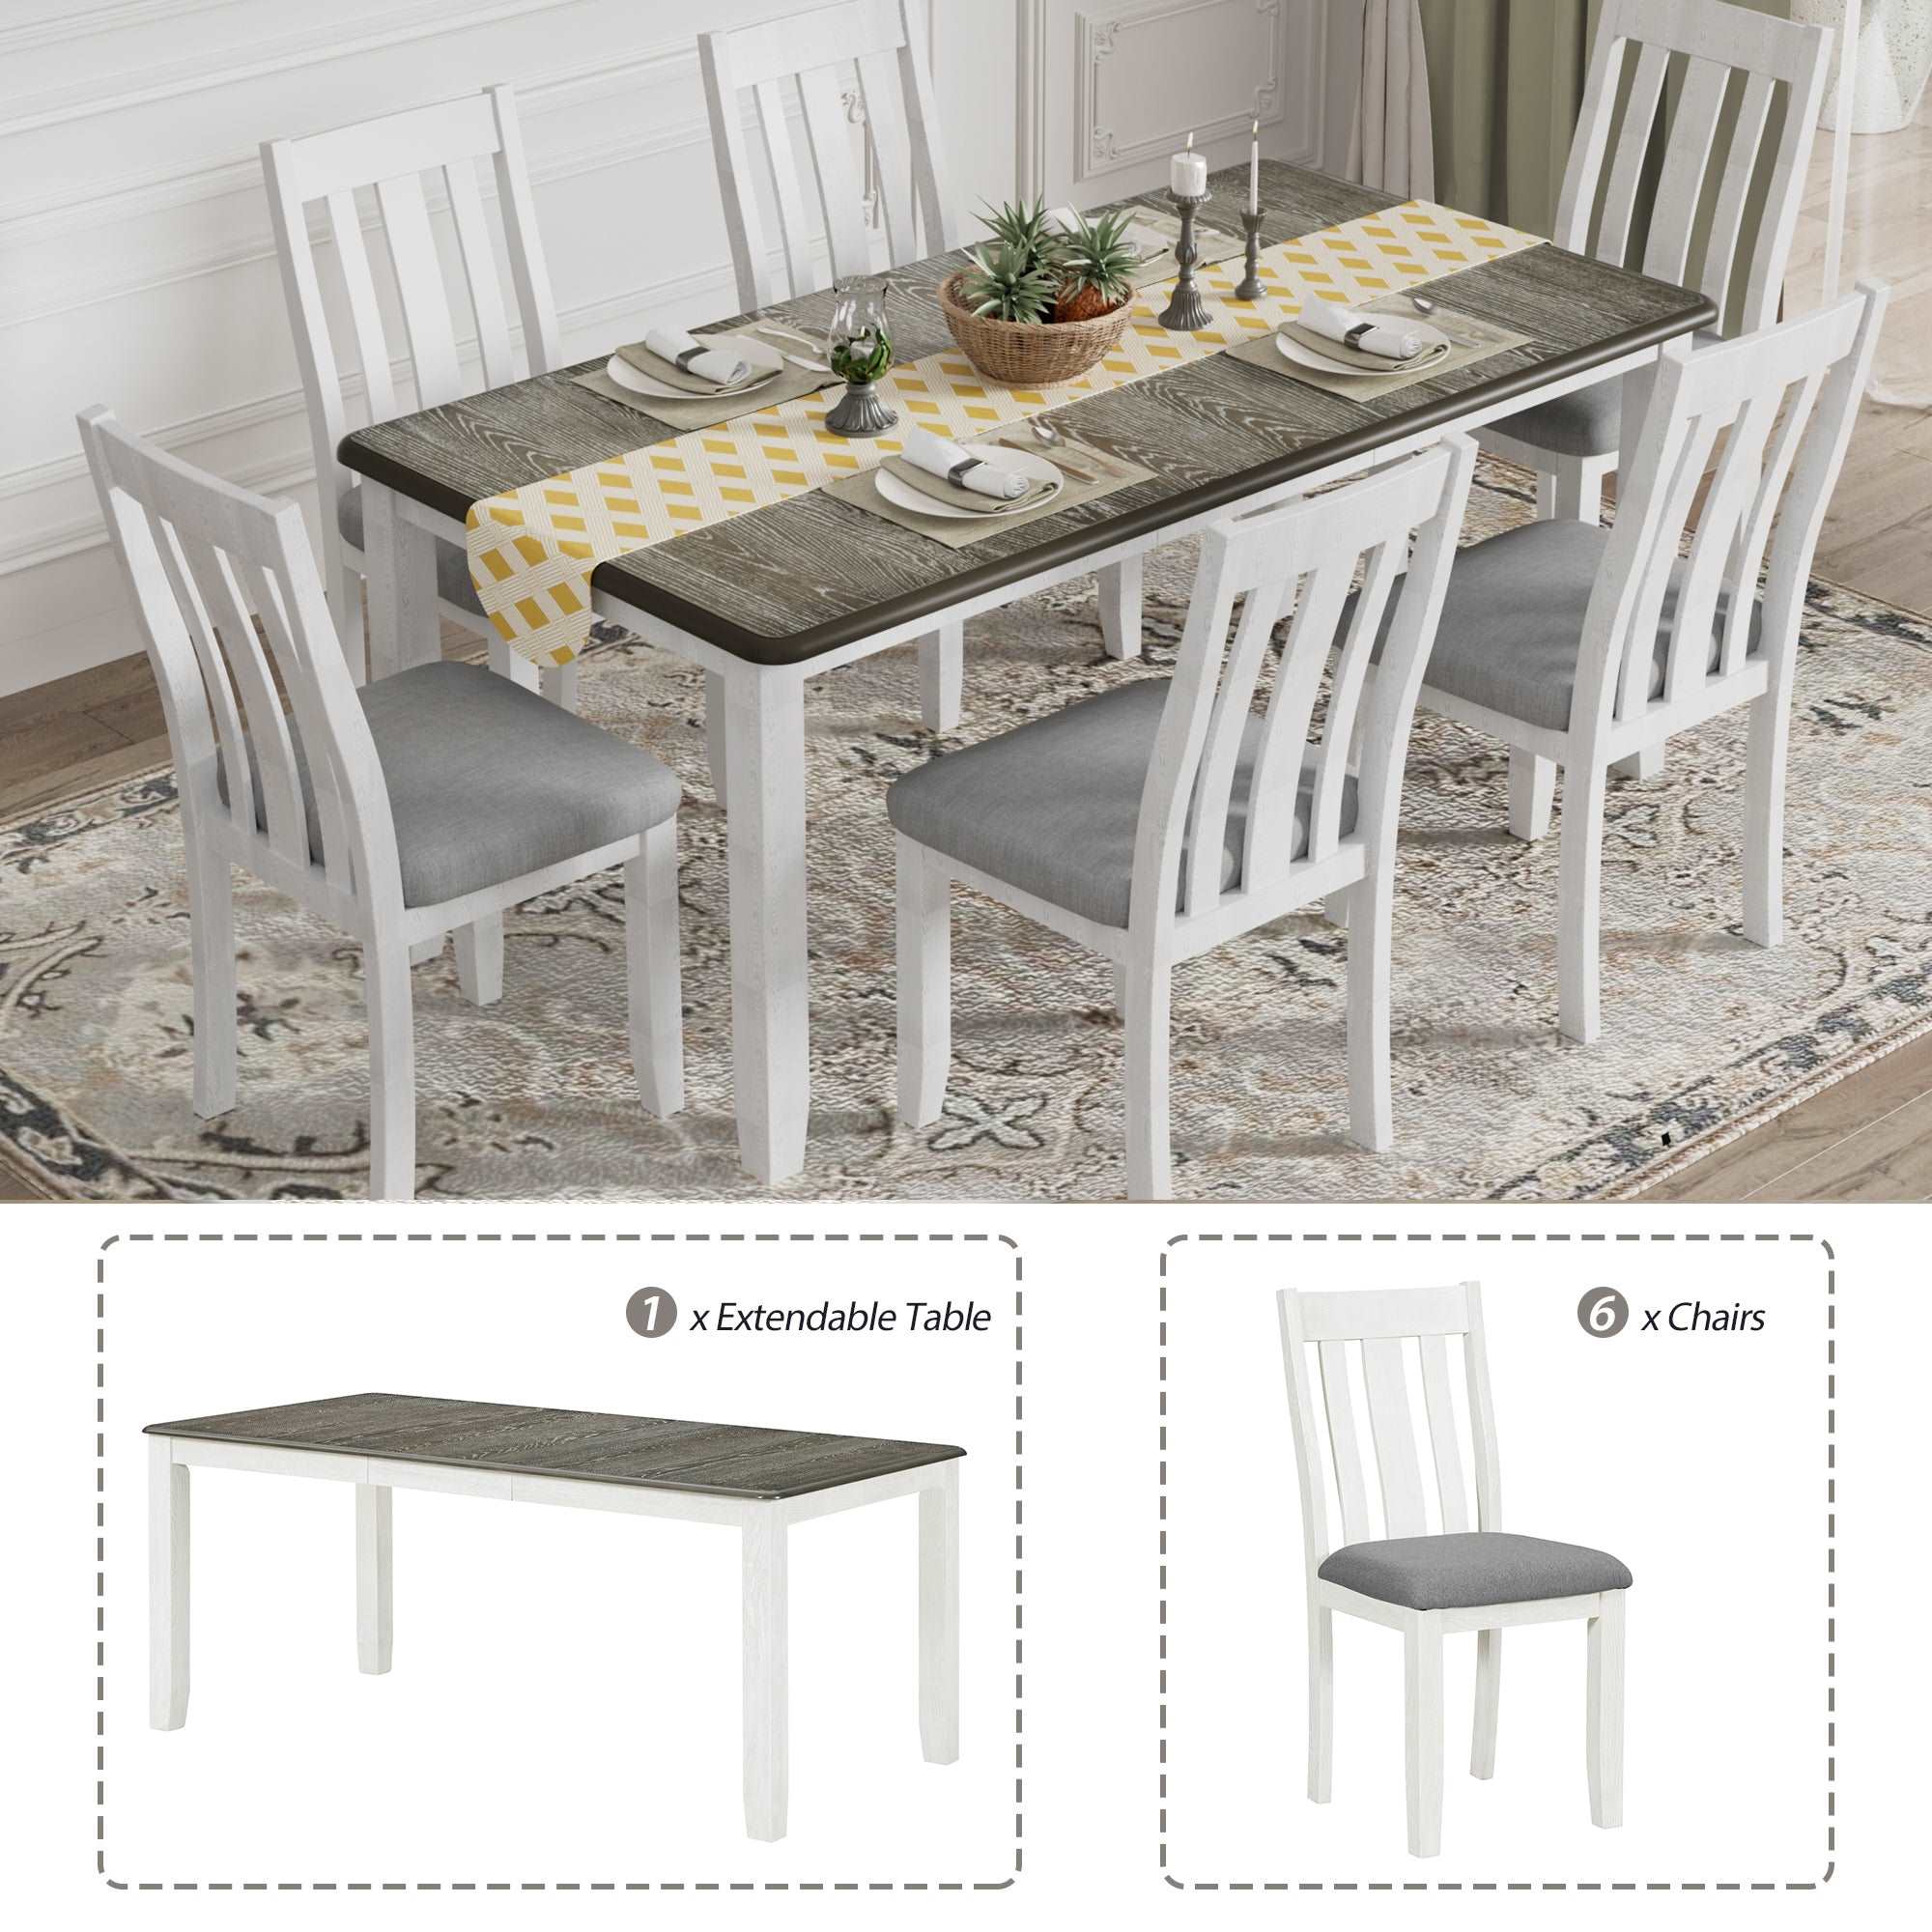 Bellemave 7-Piece Retro Style Dining Table Set with Extendable Table and 6 Upholstered Chairs